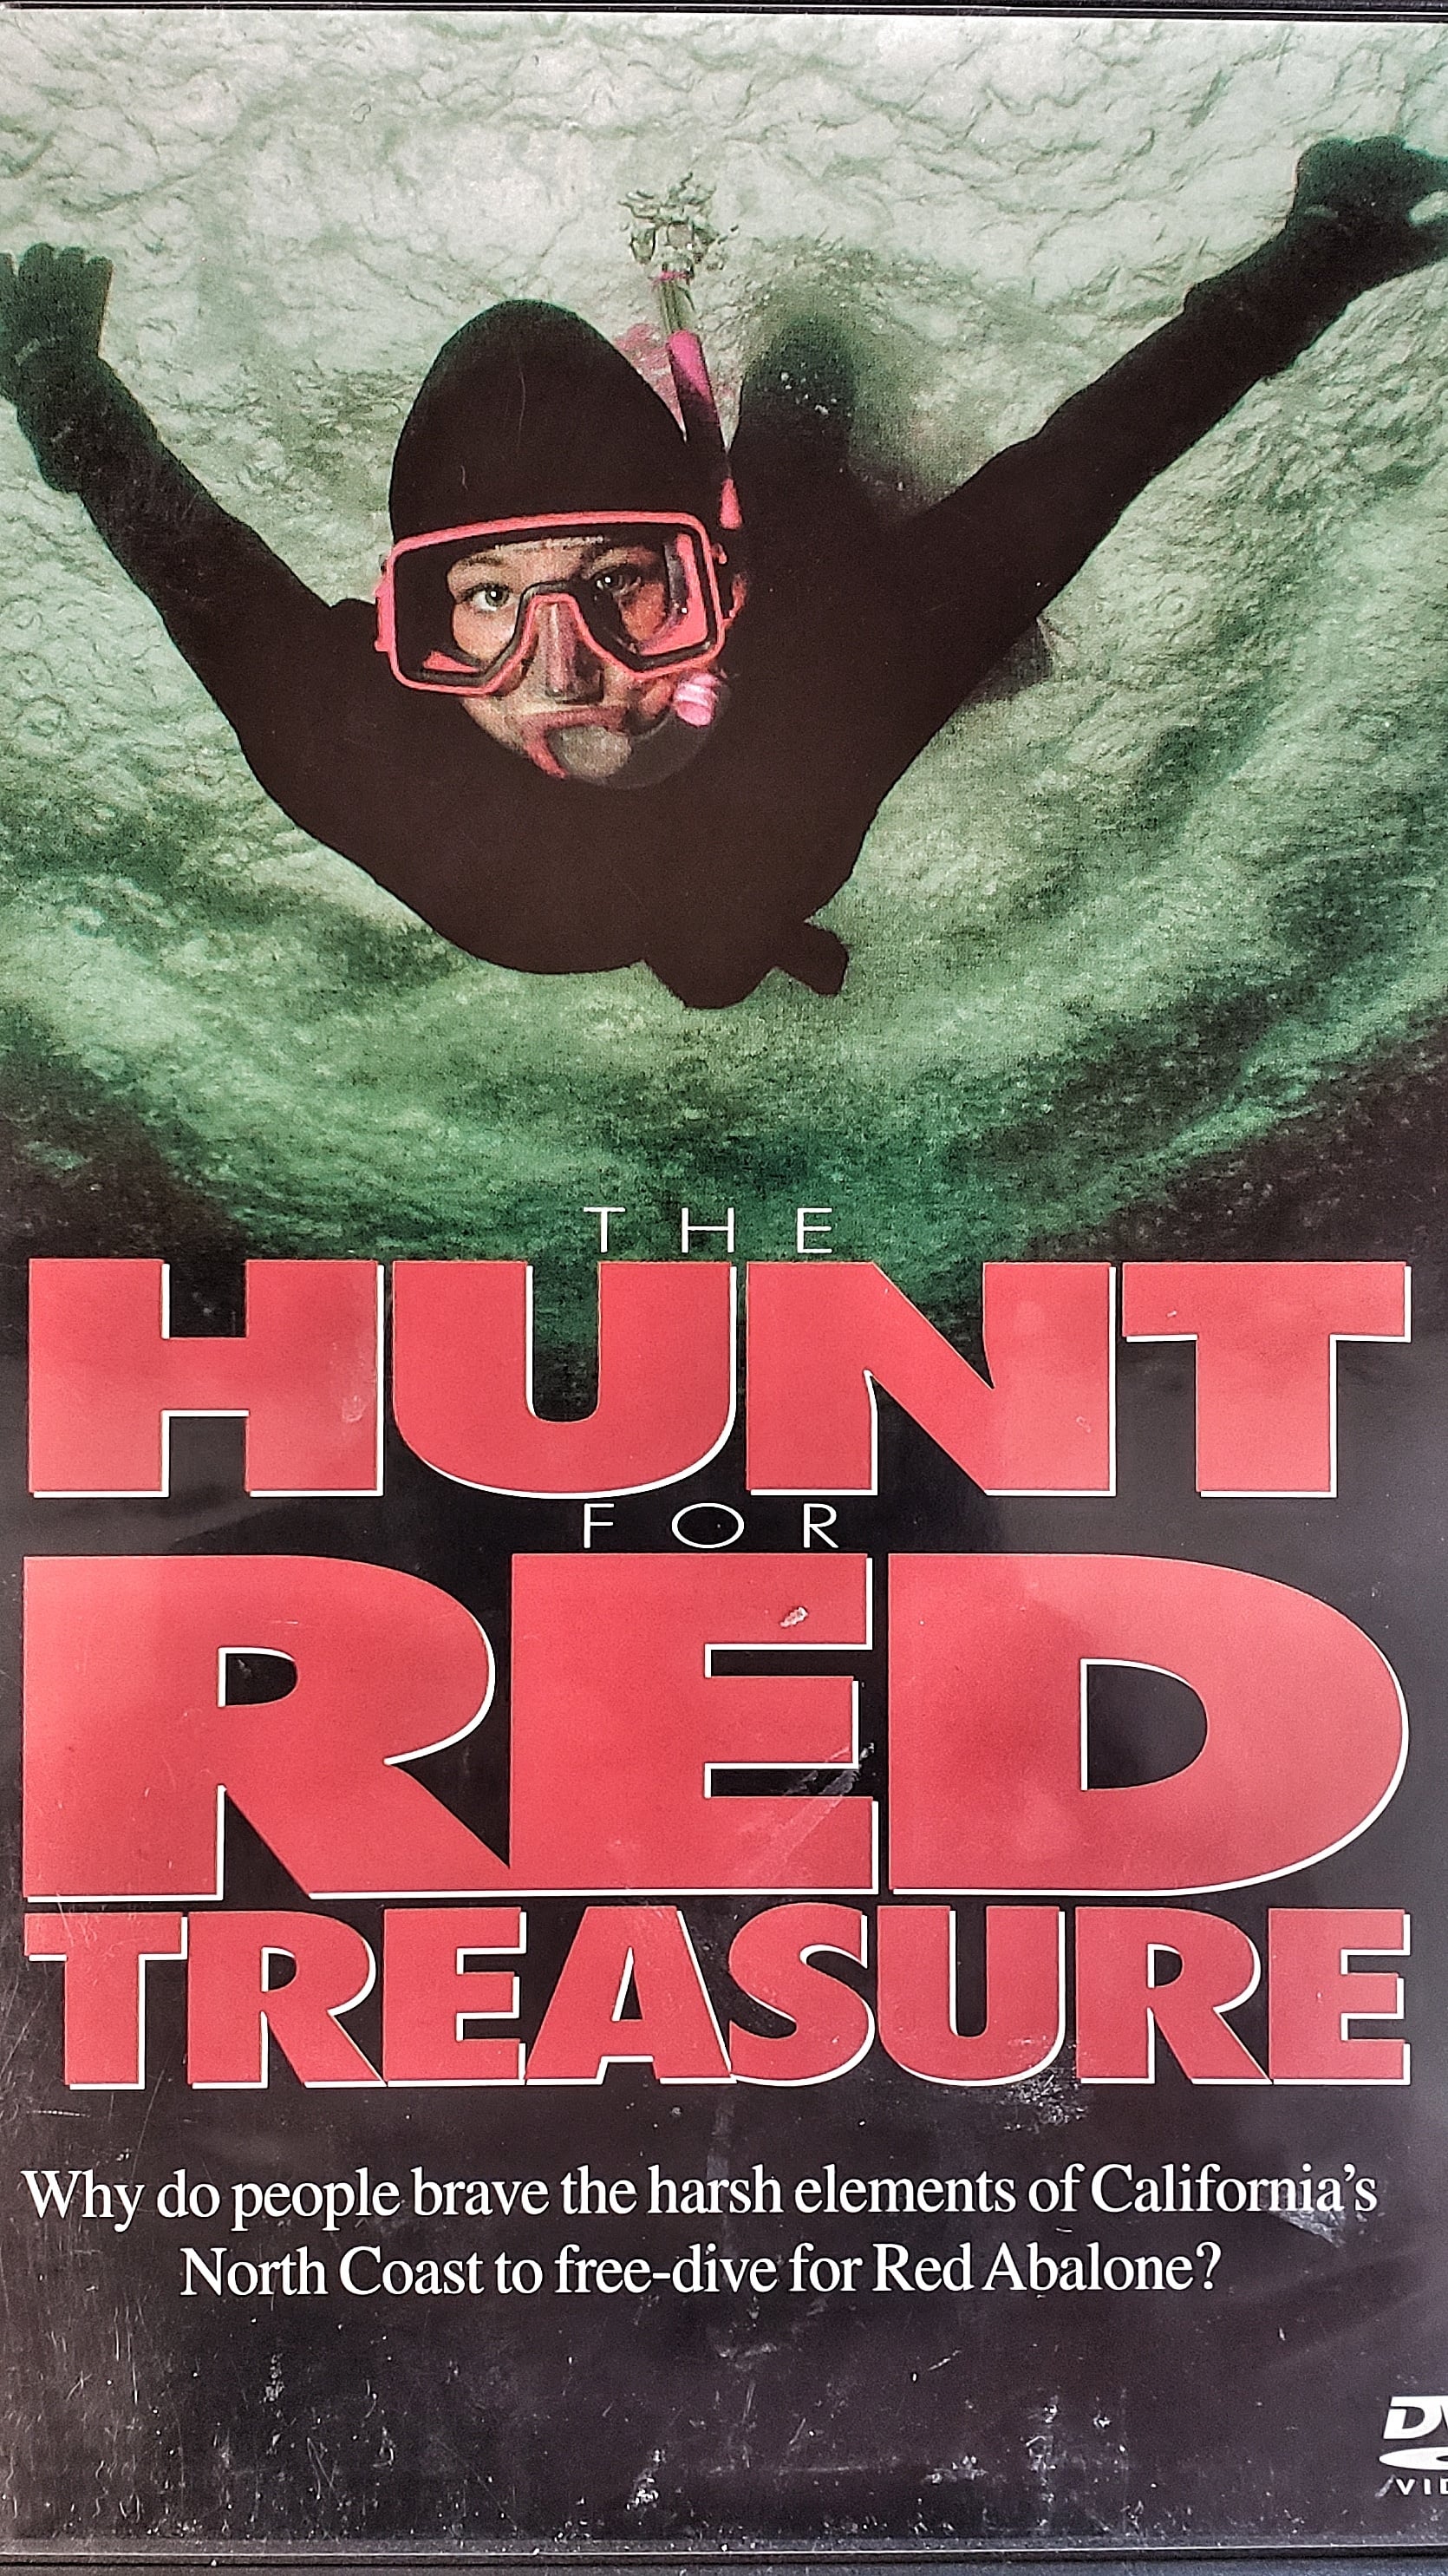 The Hunt For Red Treasure